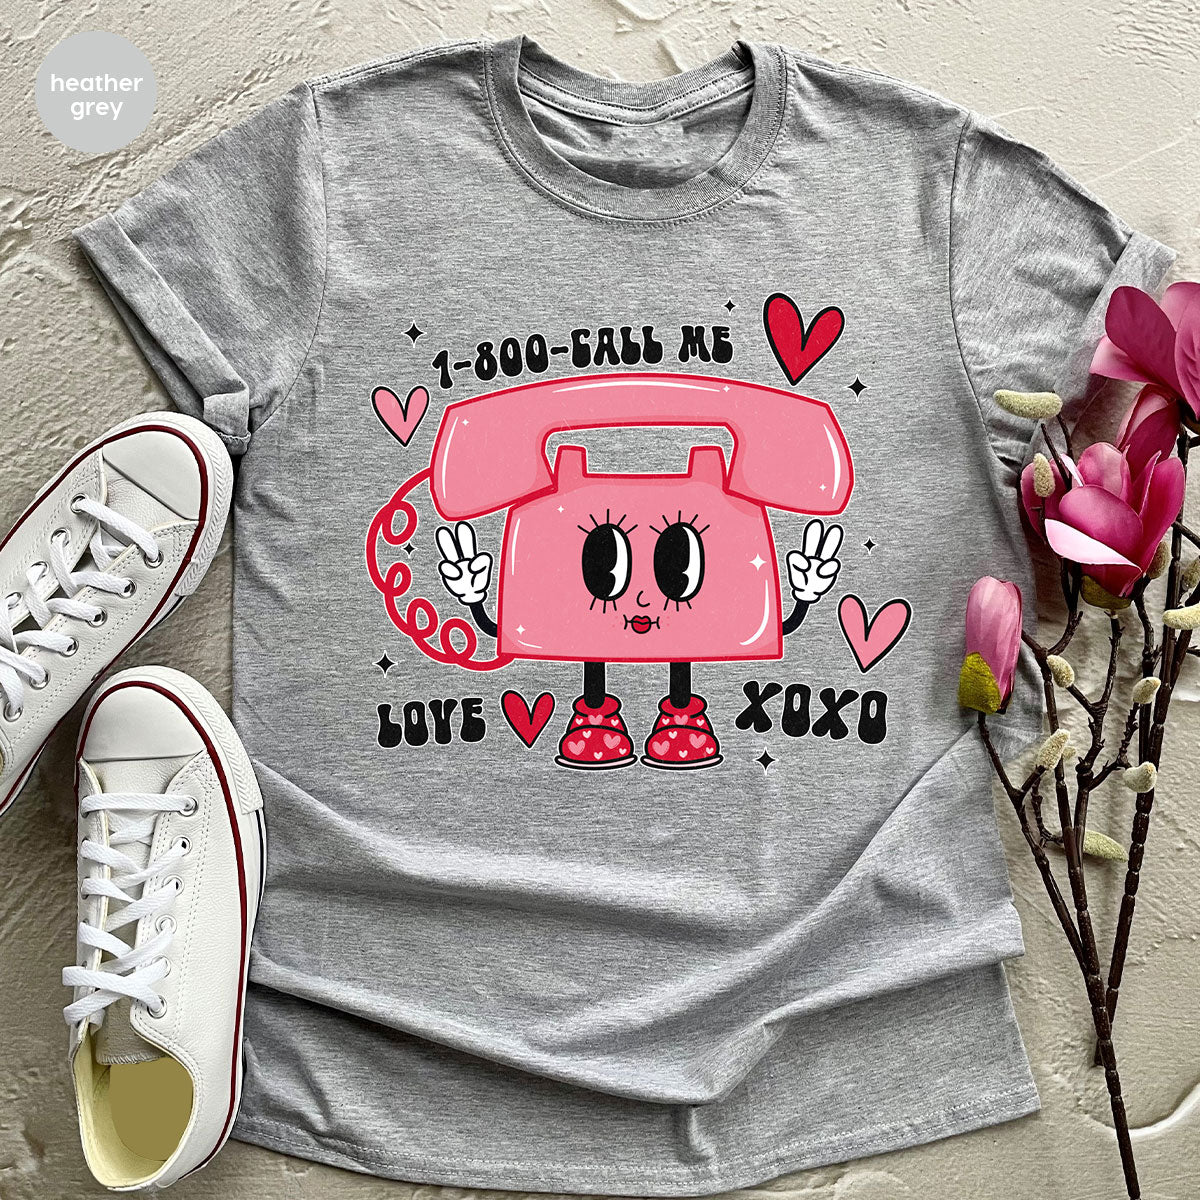 Call Me Lover Shirt, Funny Valentine's Day Shirt, Cute Love Day T-Shirt